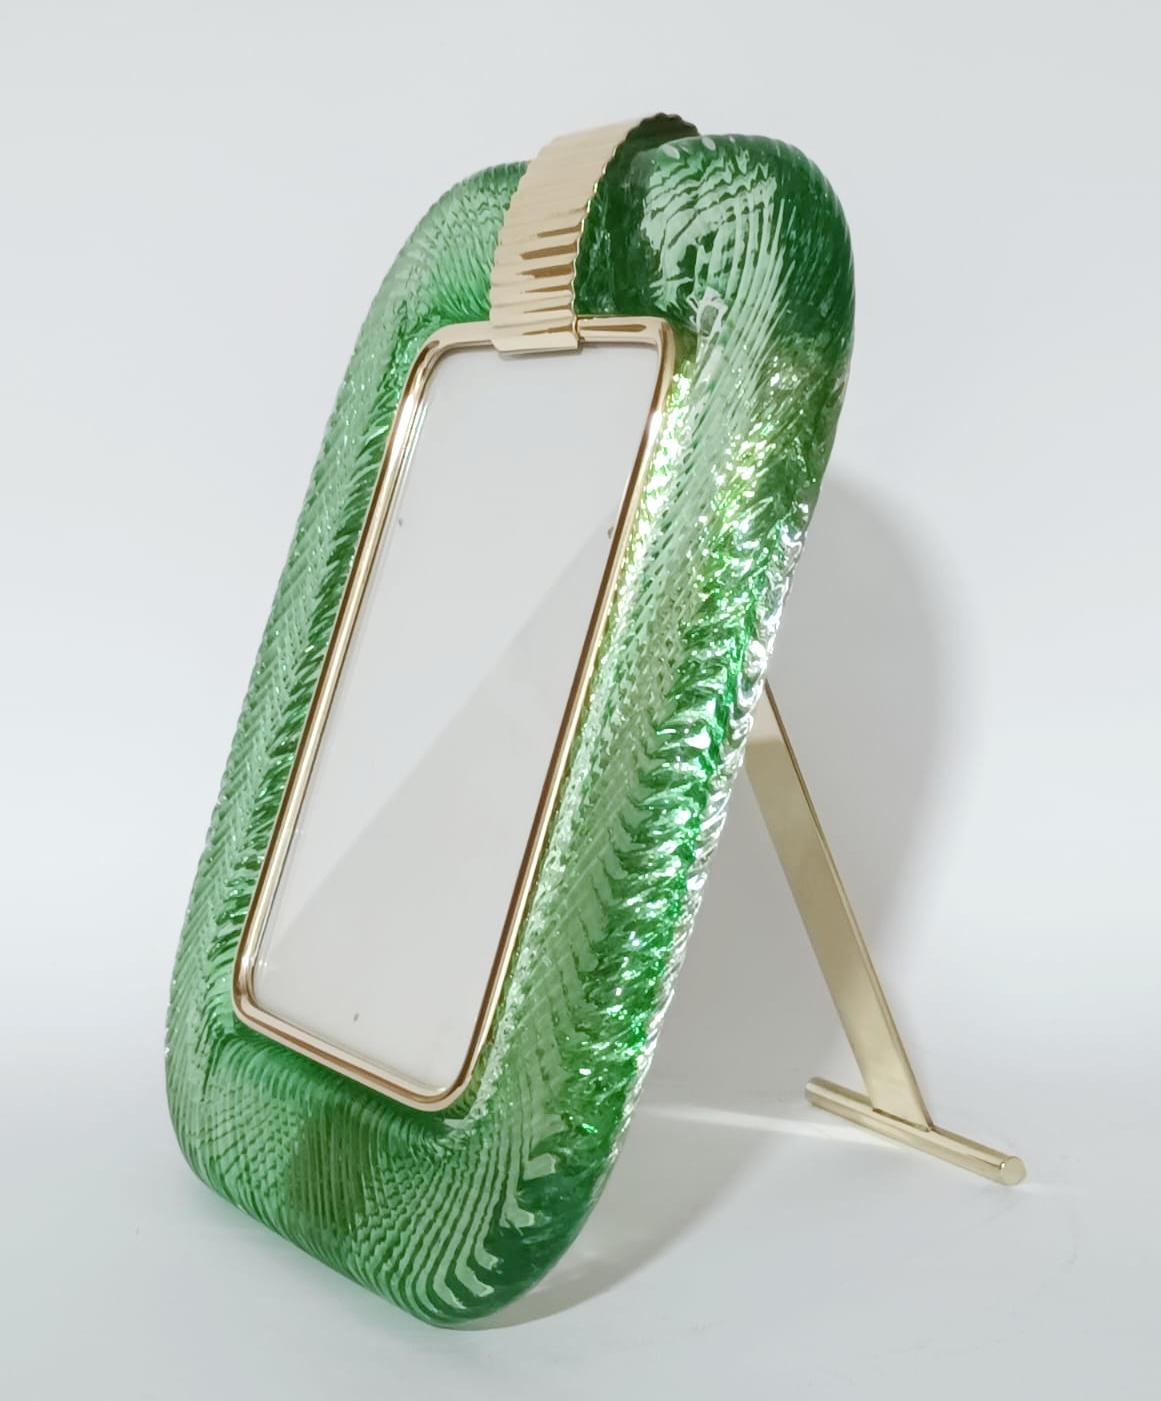 Italian Murano Green Photo Frame by Barovier e Toso - 3 Available For Sale